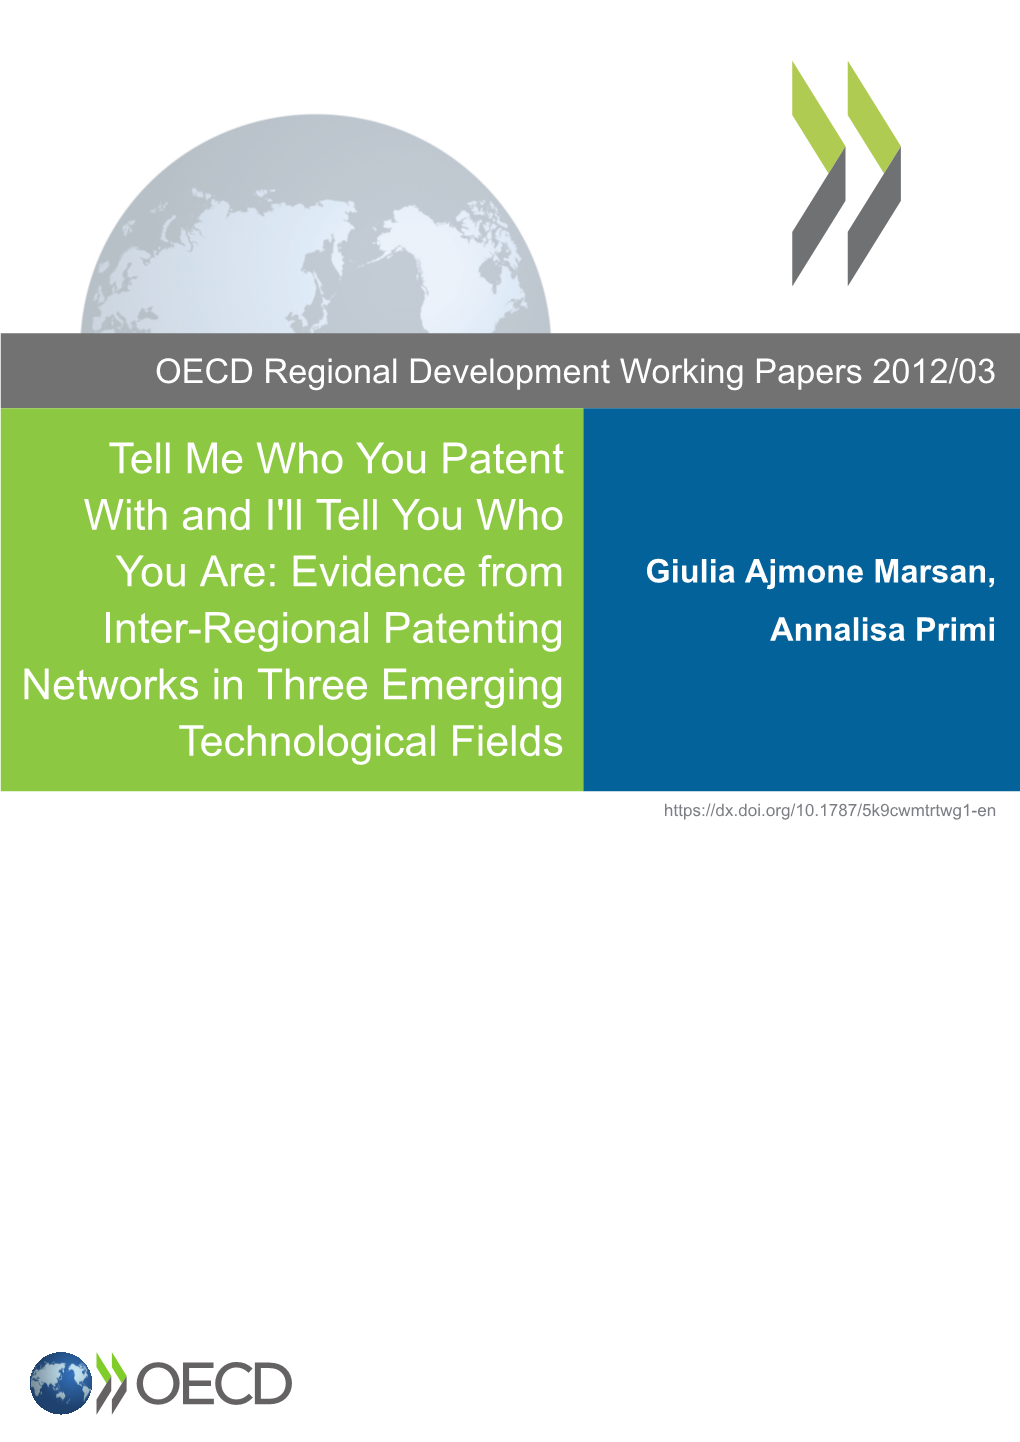 Evidence from Inter-Regional Patenting Networks in Three Emerging Technological Fields